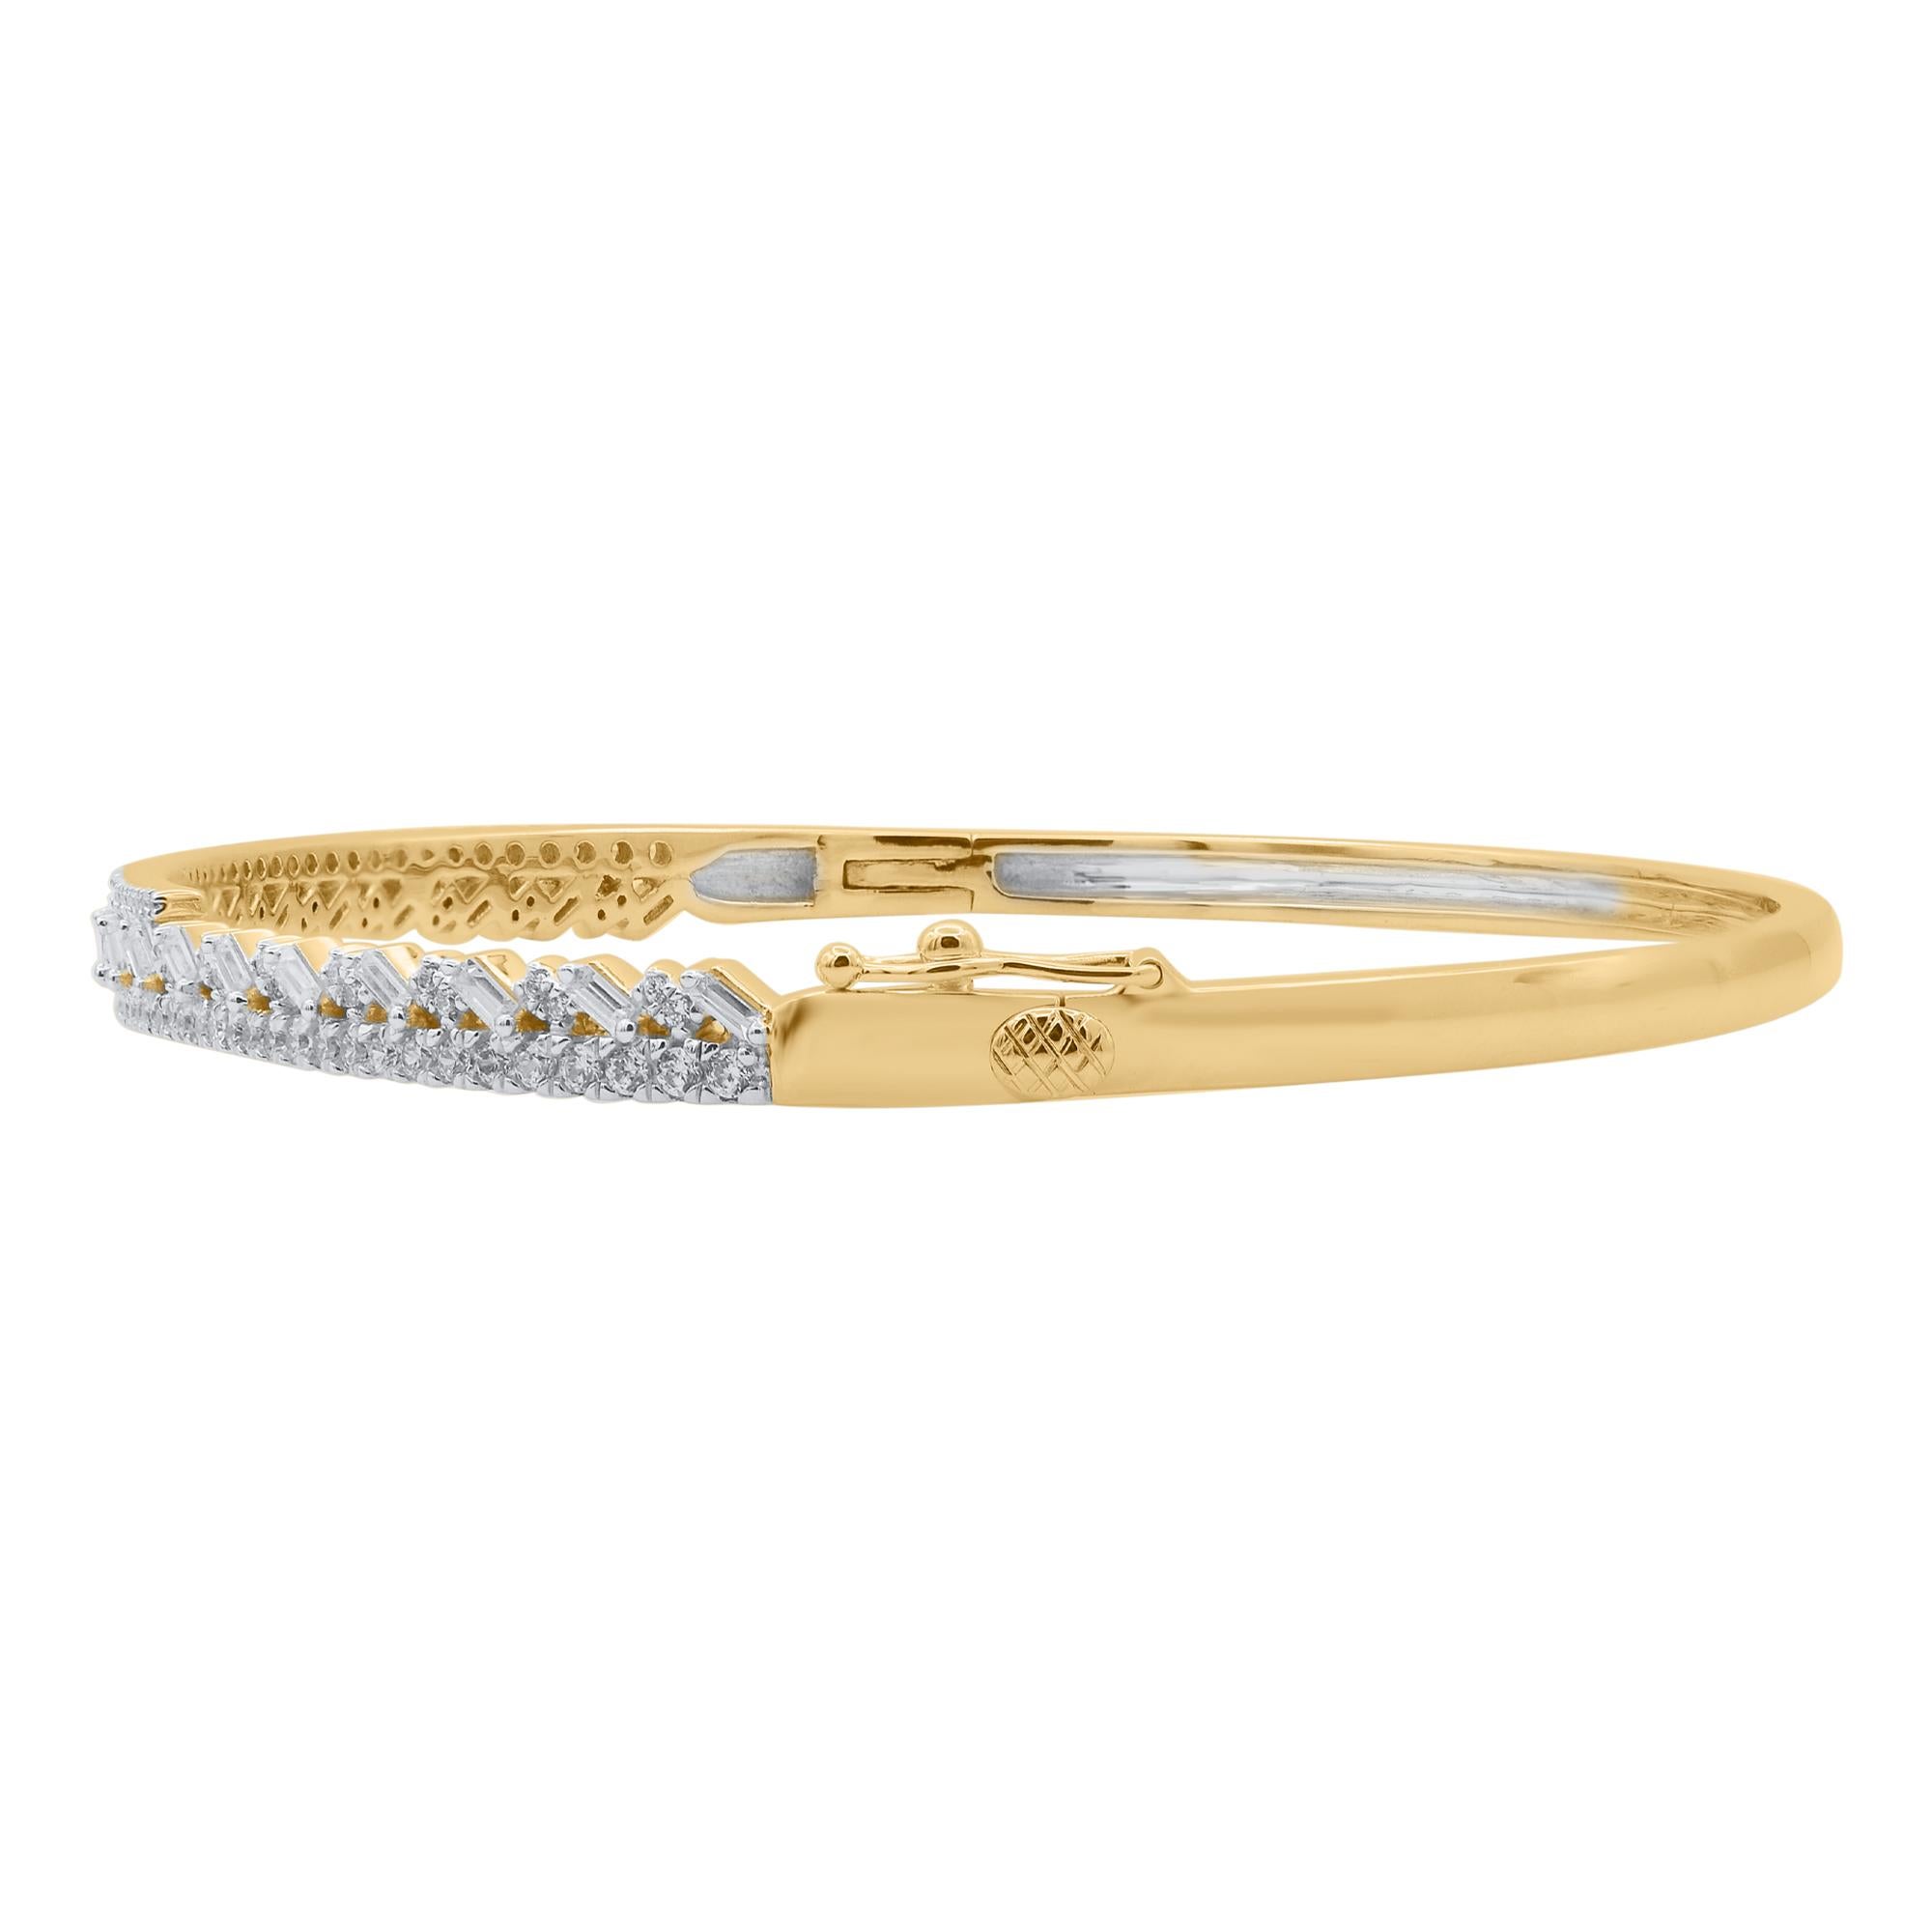 Add a sweet touch to all your favourite looks with this subtle diamond bangle bracelet.
This Shimmering bangle bracelet features 139 natural single cut, brilliant cut & baguette diamonds in prong setting and crafted in 14kt yellow gold. Diamonds are